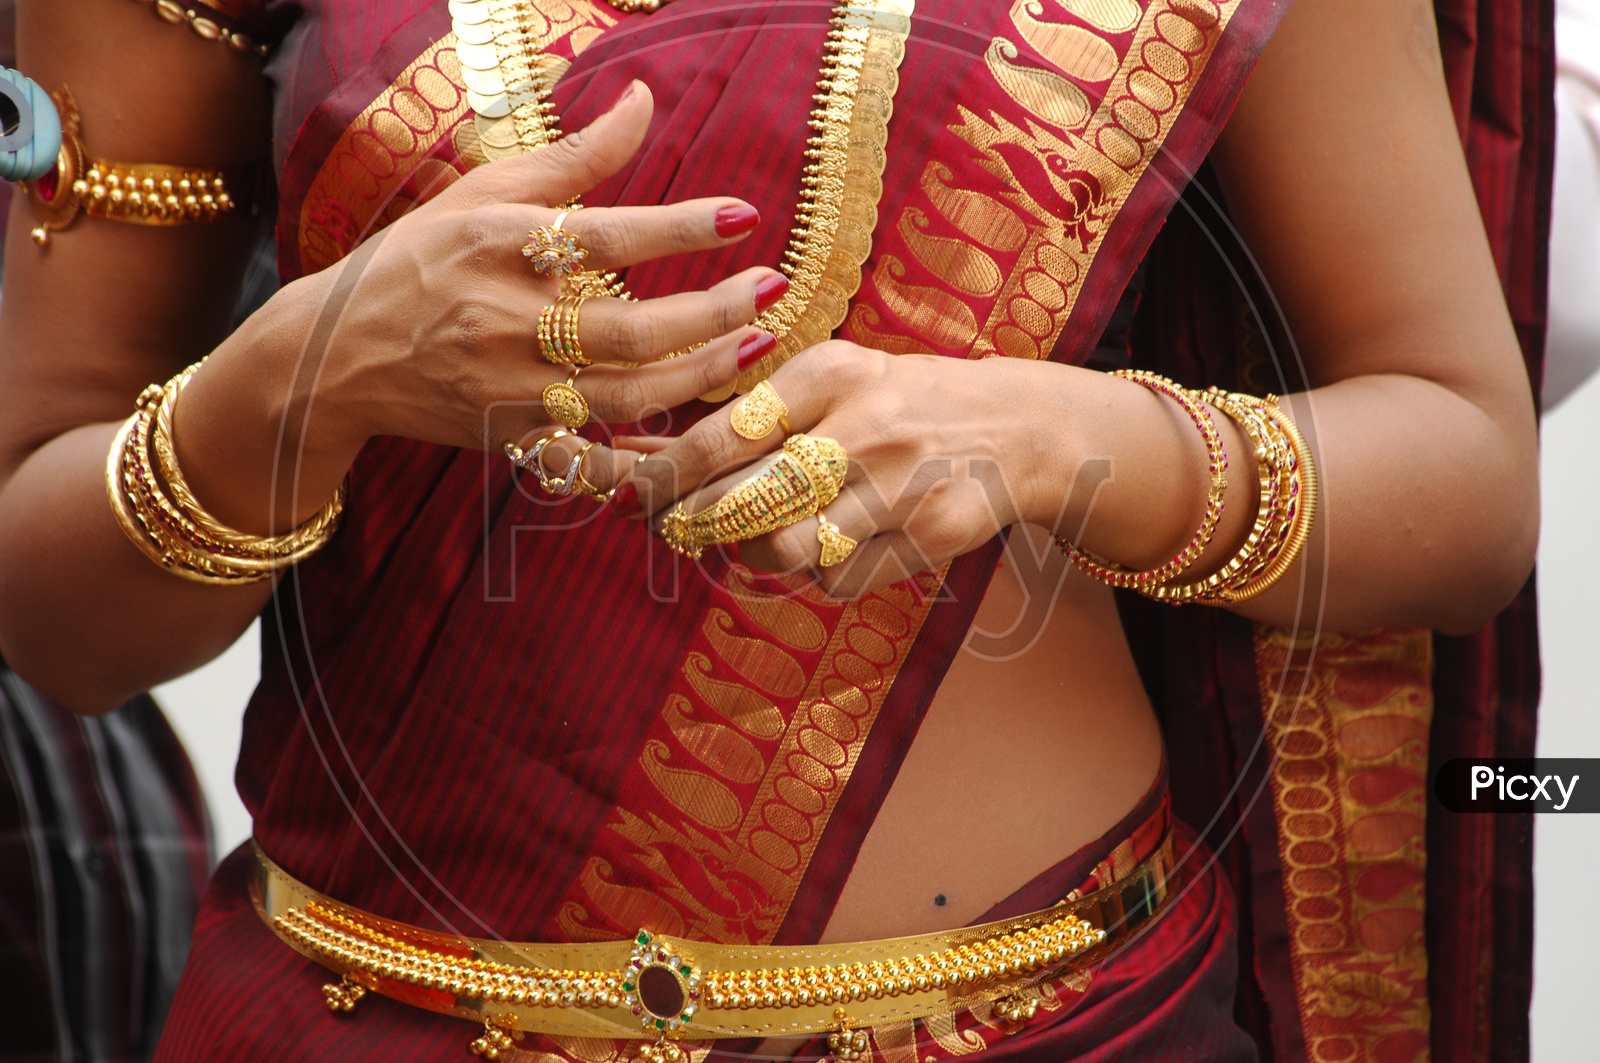 A Young Traditional Indian Woman Or Bride Wearing an Elegant Jewellery